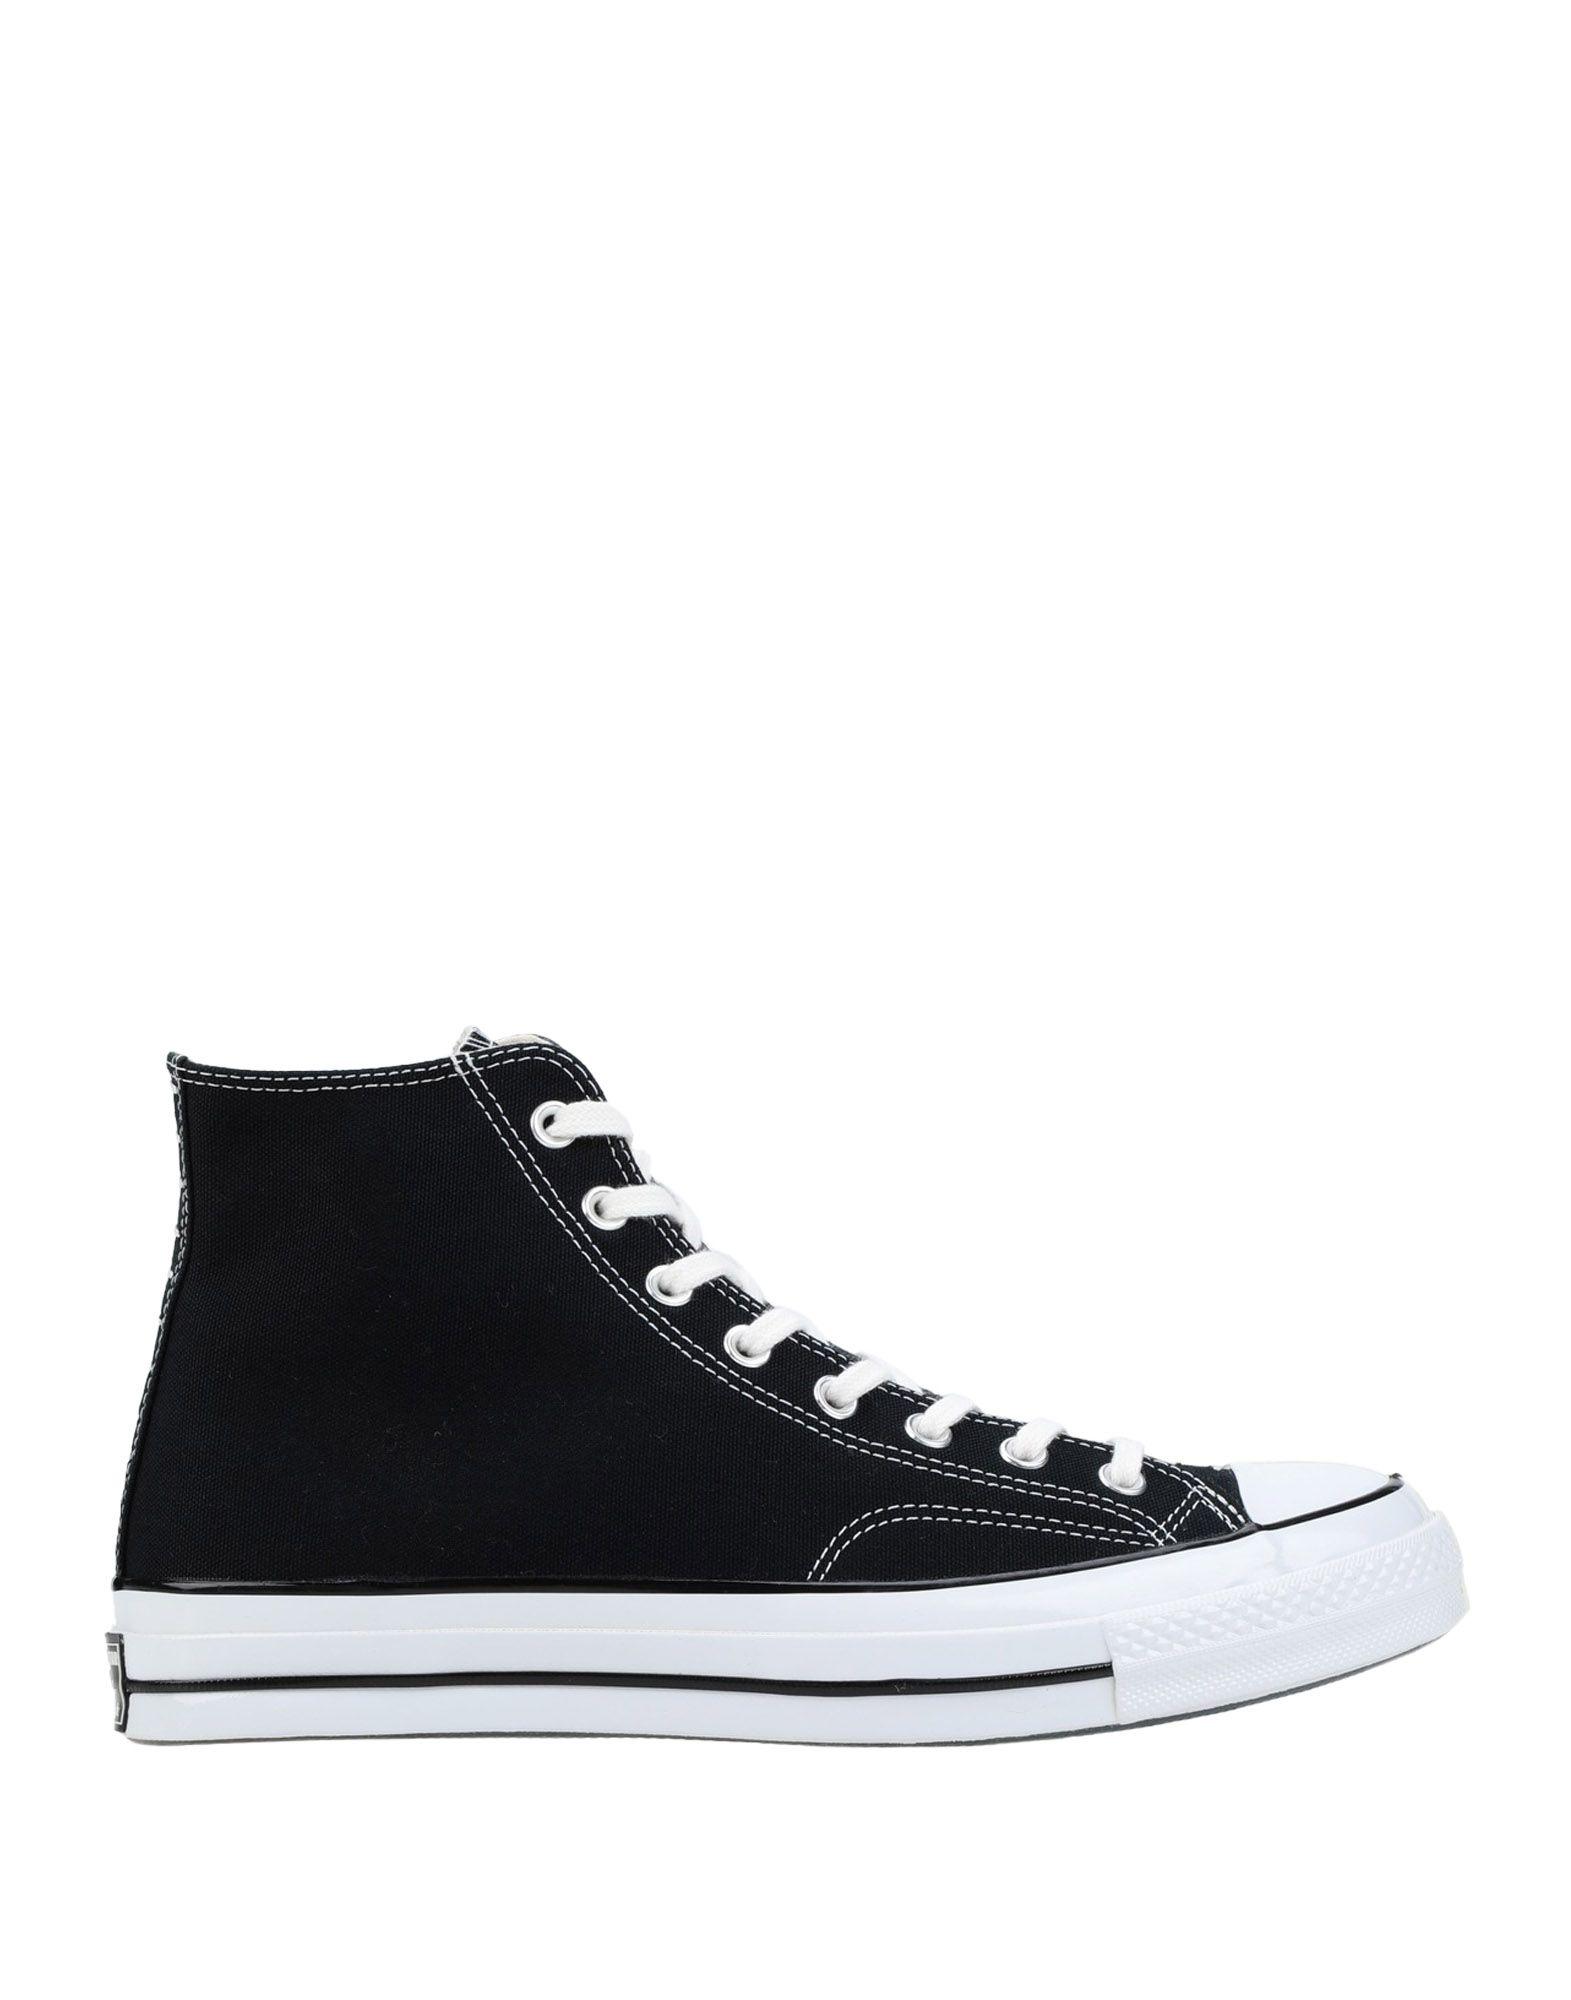 Converse High-tops & Sneakers in Black for Men - Lyst